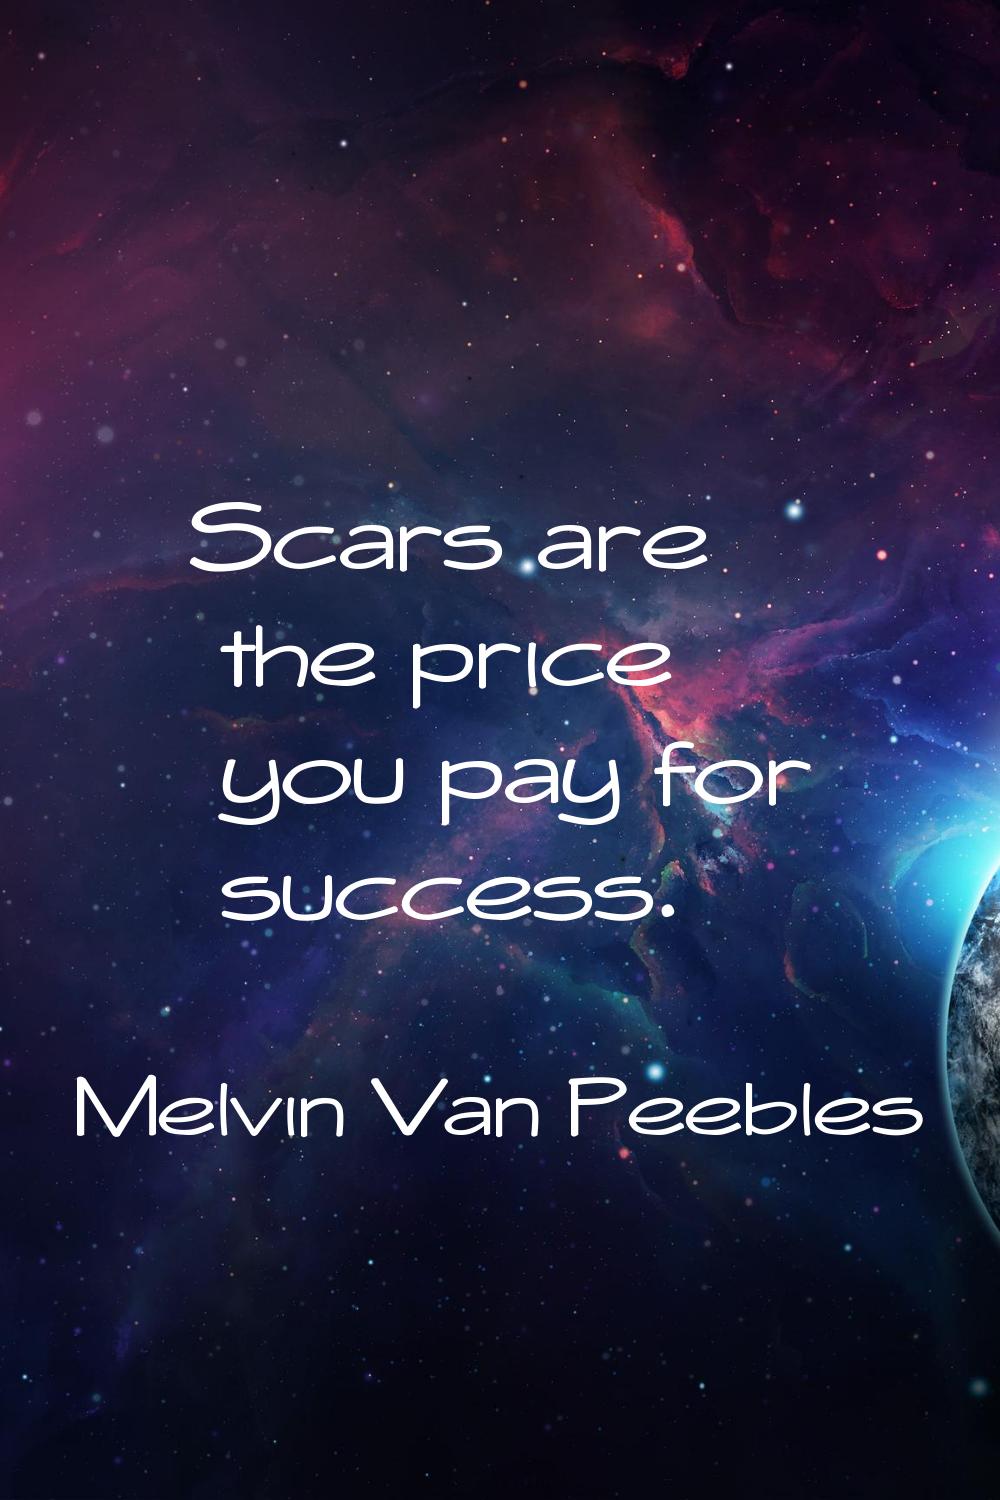 Scars are the price you pay for success.